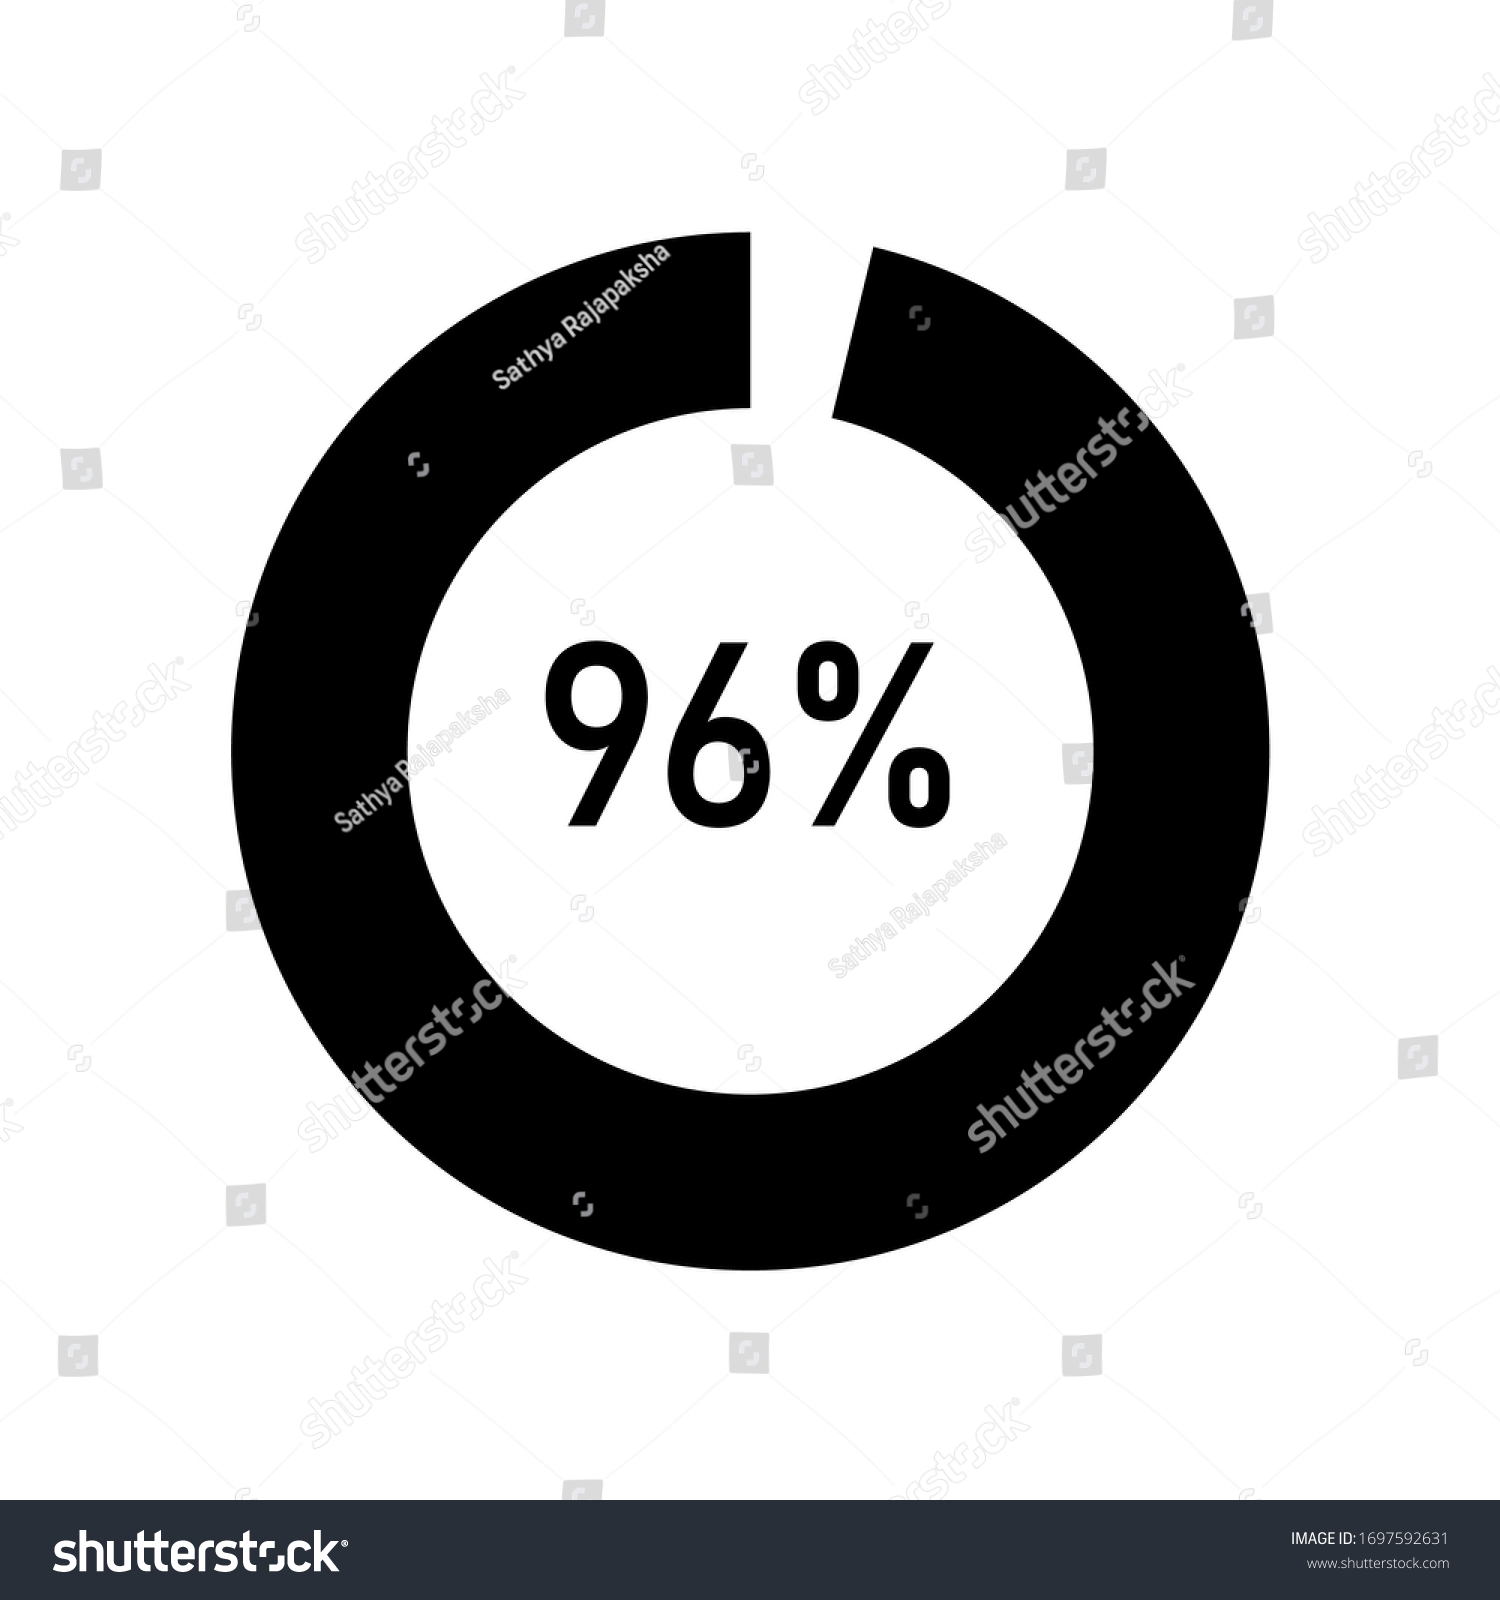 SVG of circle percentage diagrams meter ready-to-use for web design, user interface UI or infographic - indicator with black showing 96% svg